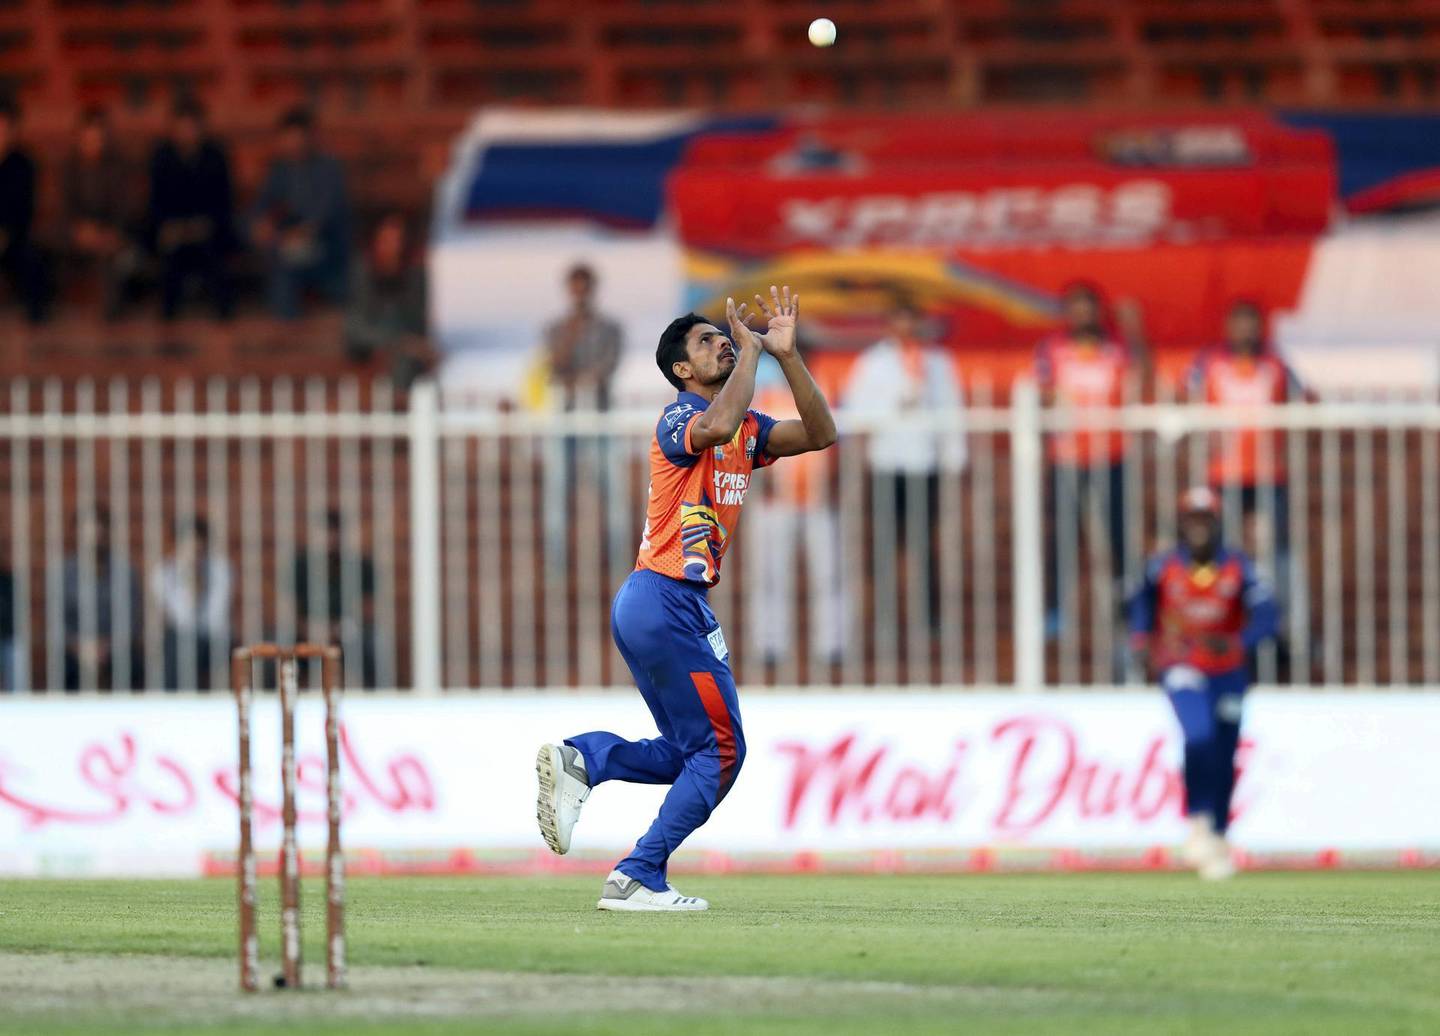 Sharjah, United Arab Emirates - November 22, 2018: Aamer Yamin of Bengal catches out Warriors Hardus Viljoen to take 4 wickets in a row during the game between Bengal Tigers and Northern Warriors in the T10 league. Thursday the 22nd of November 2018 at Sharjah cricket stadium, Sharjah. Chris Whiteoak / The National